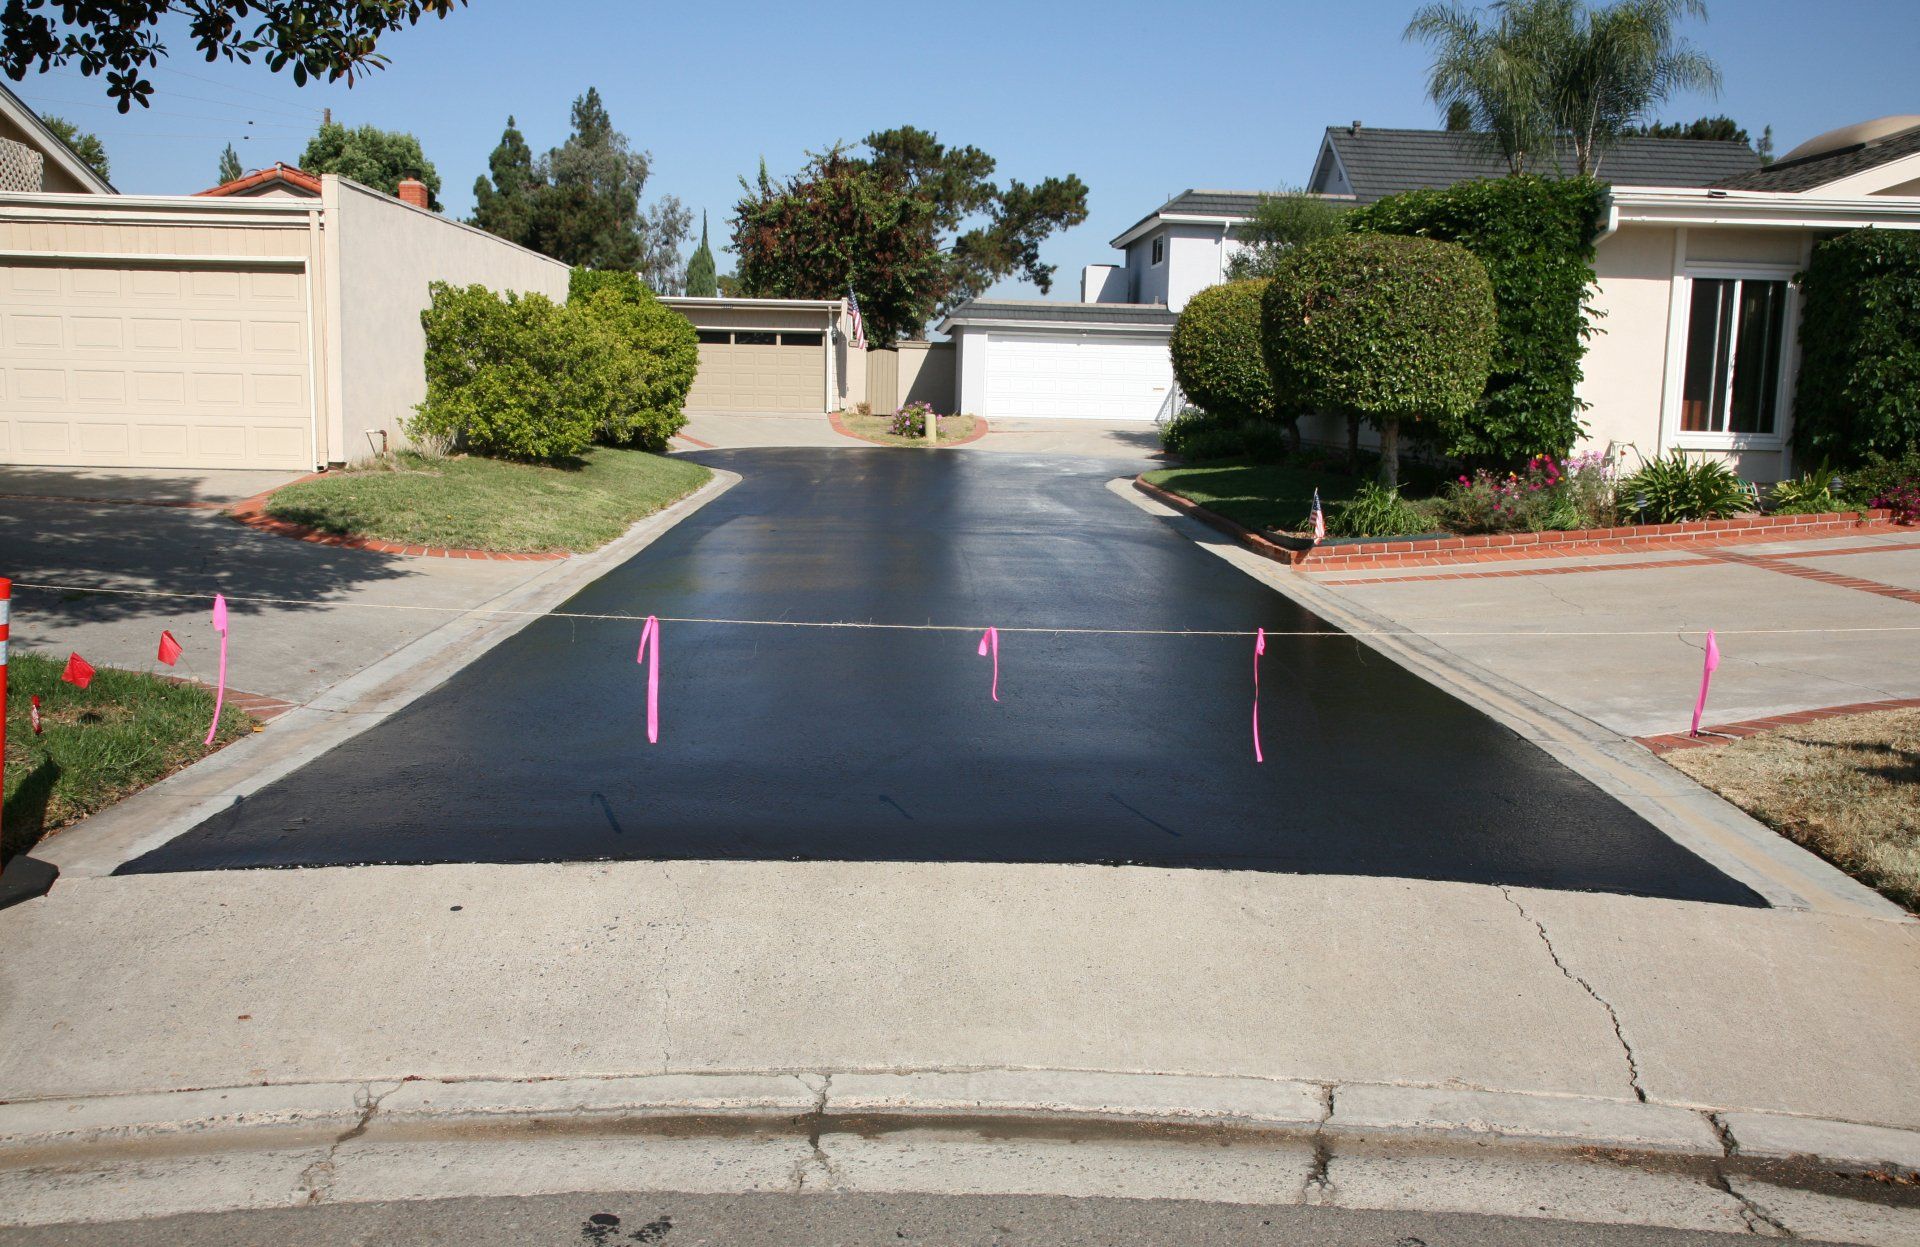 With the fresh coat of sealcoat, the appearance of asphalt has improved, making it appear new and durable.